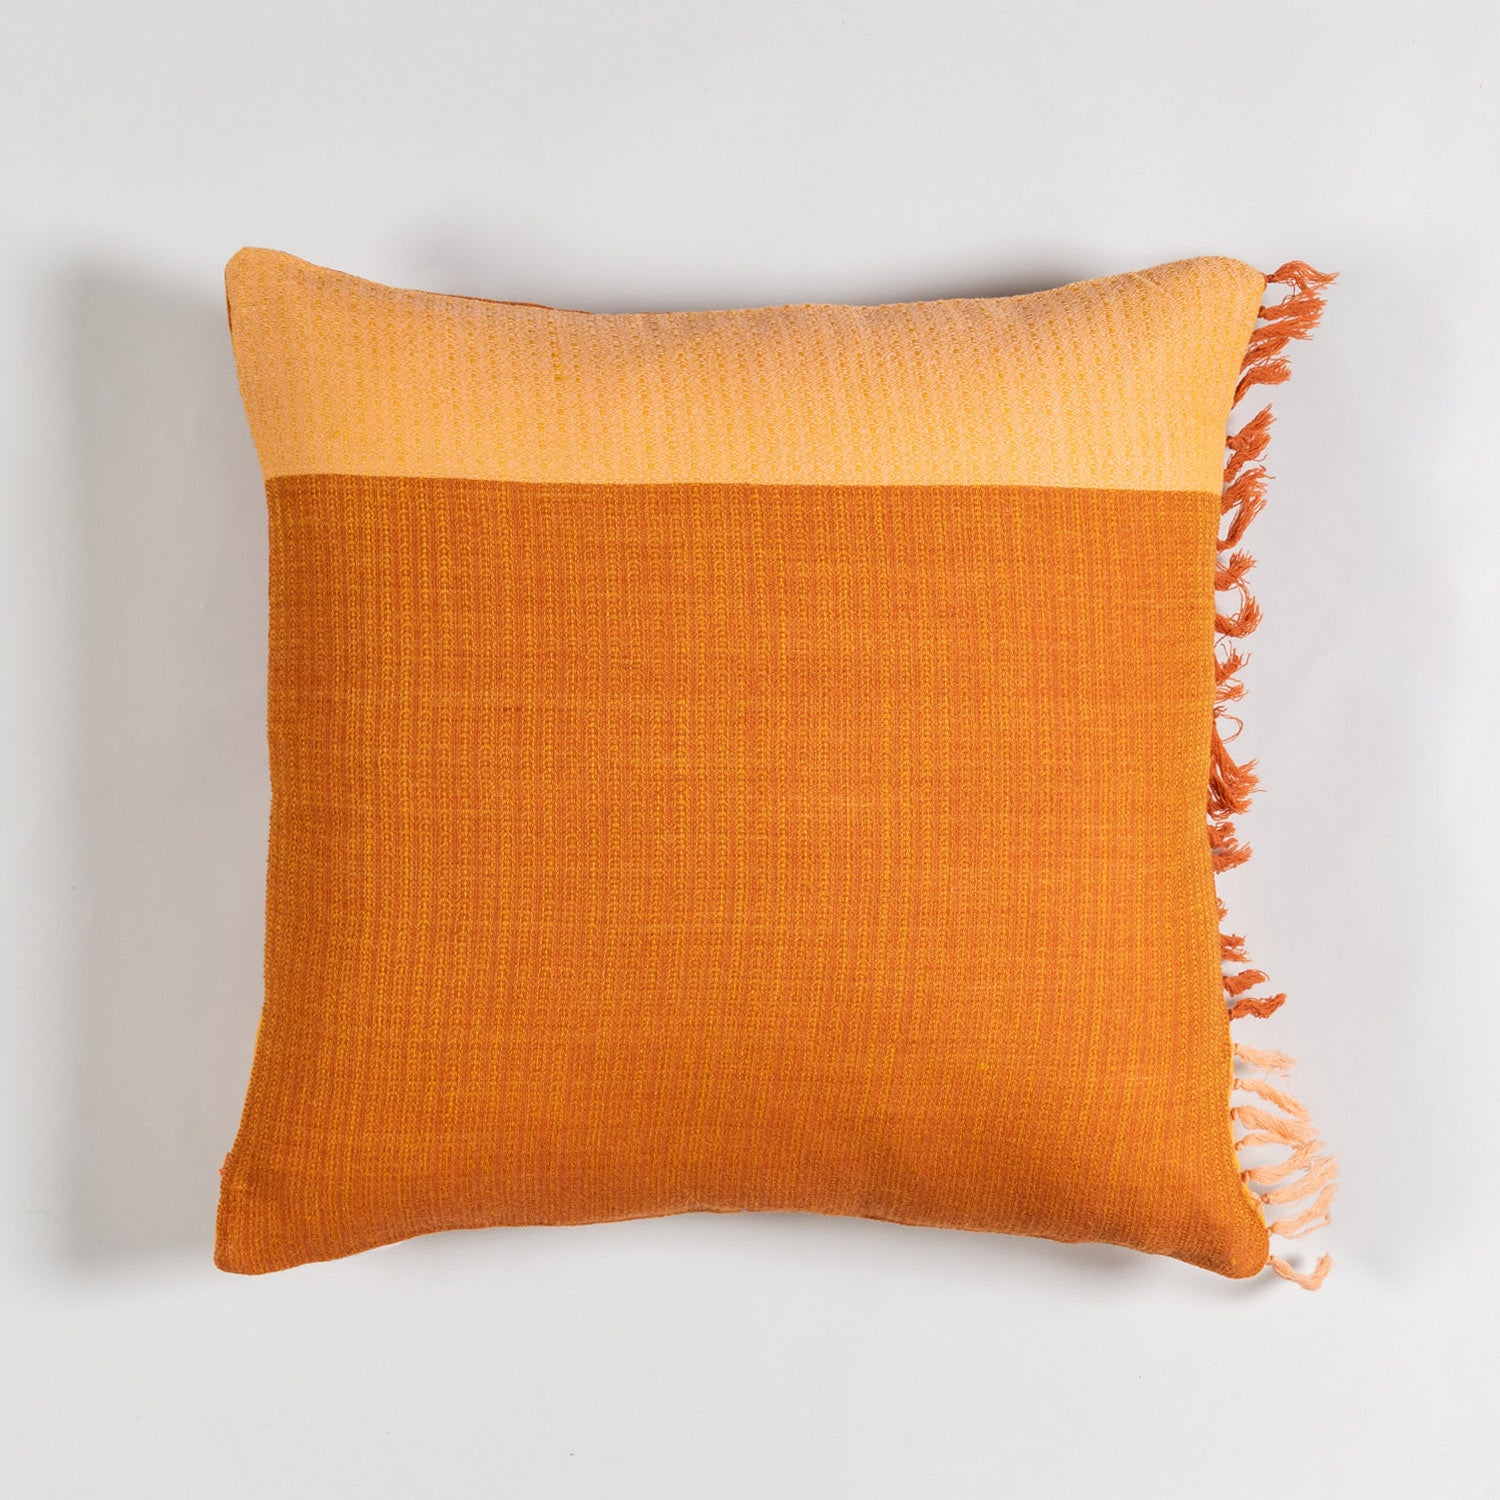 Handwoven Upcycled Mustard & Yellow Wool Cushion Cover - 18x18